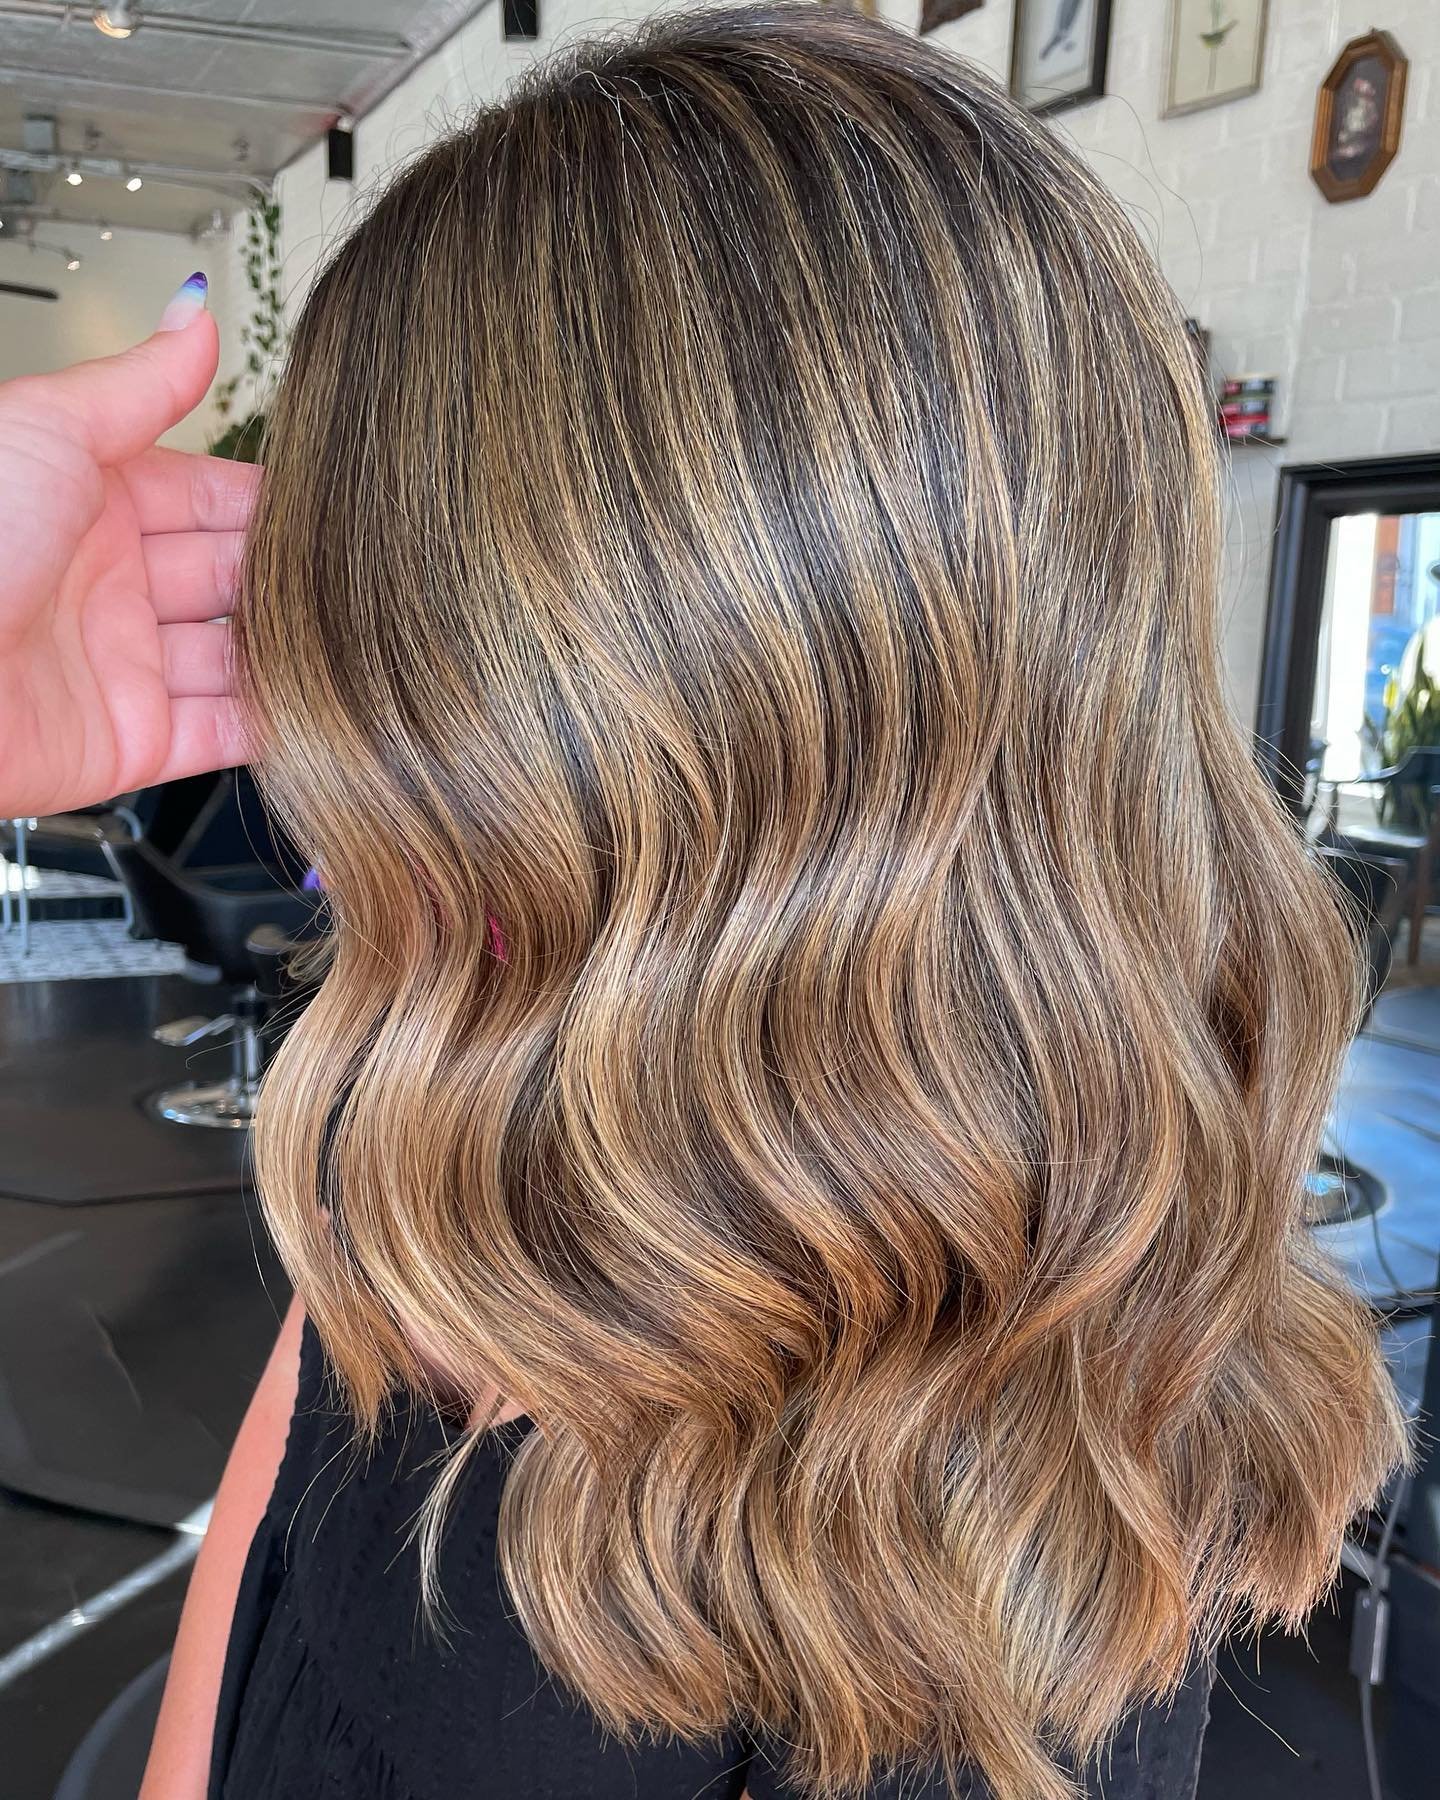 Warm, dimensional and healthy ✨ a perfect trifecta 
&bull; Hair by Hillary &bull;
.
.
.
#dimensionalcolor #dimensionalbrunette #brunettebalayage #behindthechair #rvahairstylist #rvasalon